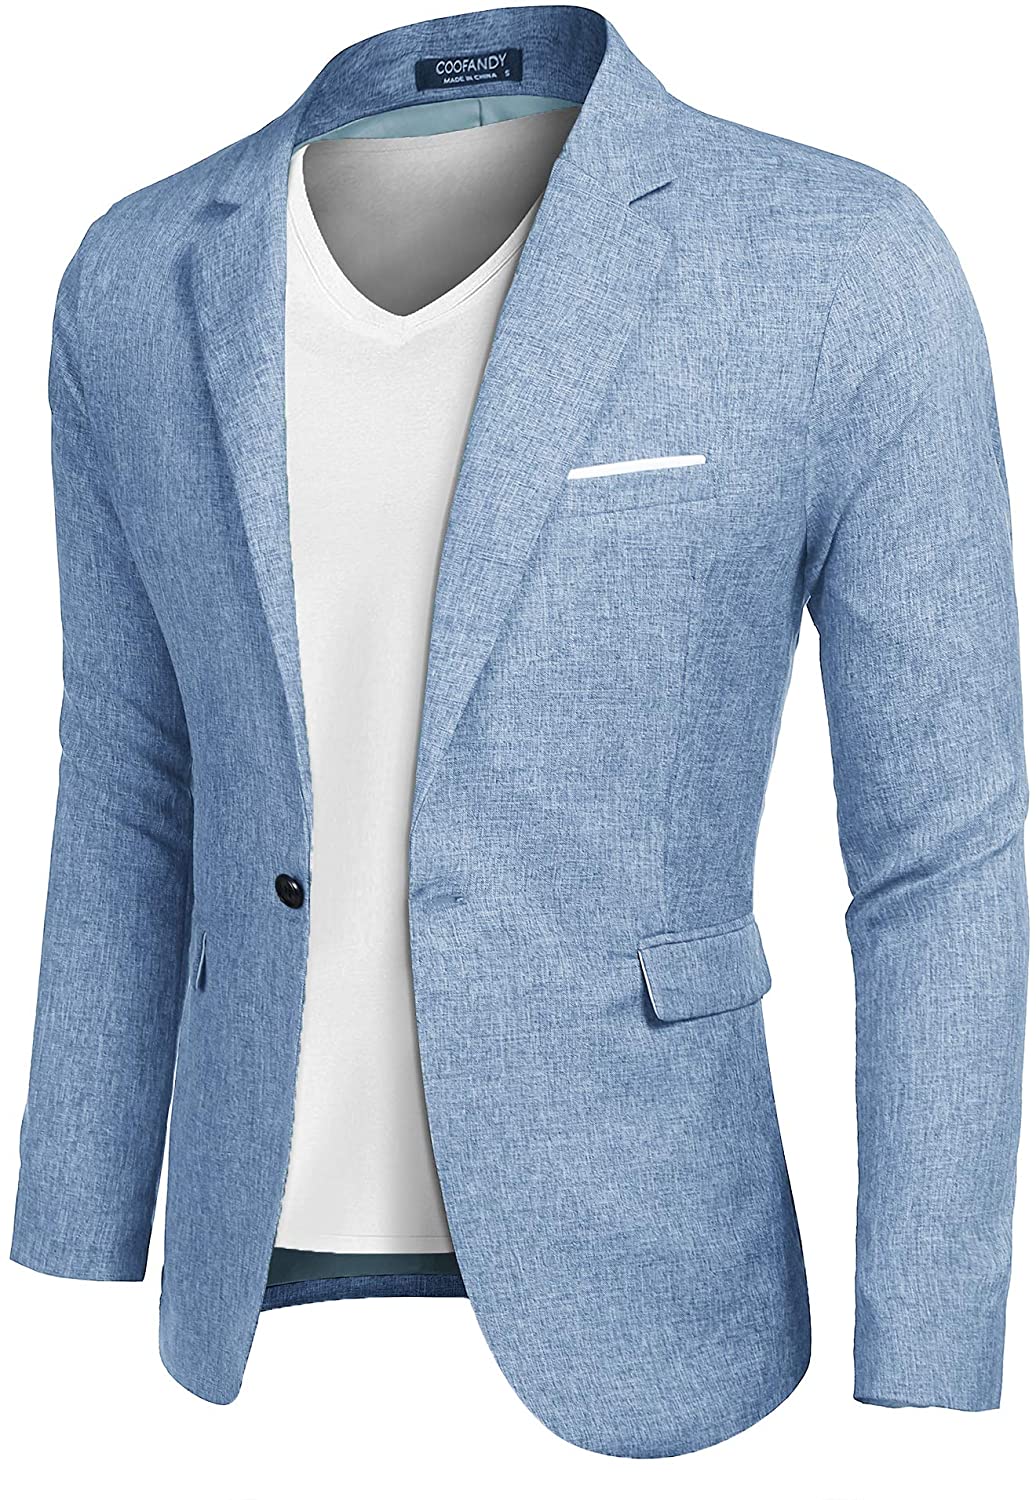 COOFANDY Mens Casual Suit Blazer Jackets Lightweight Sports Coats One Button 